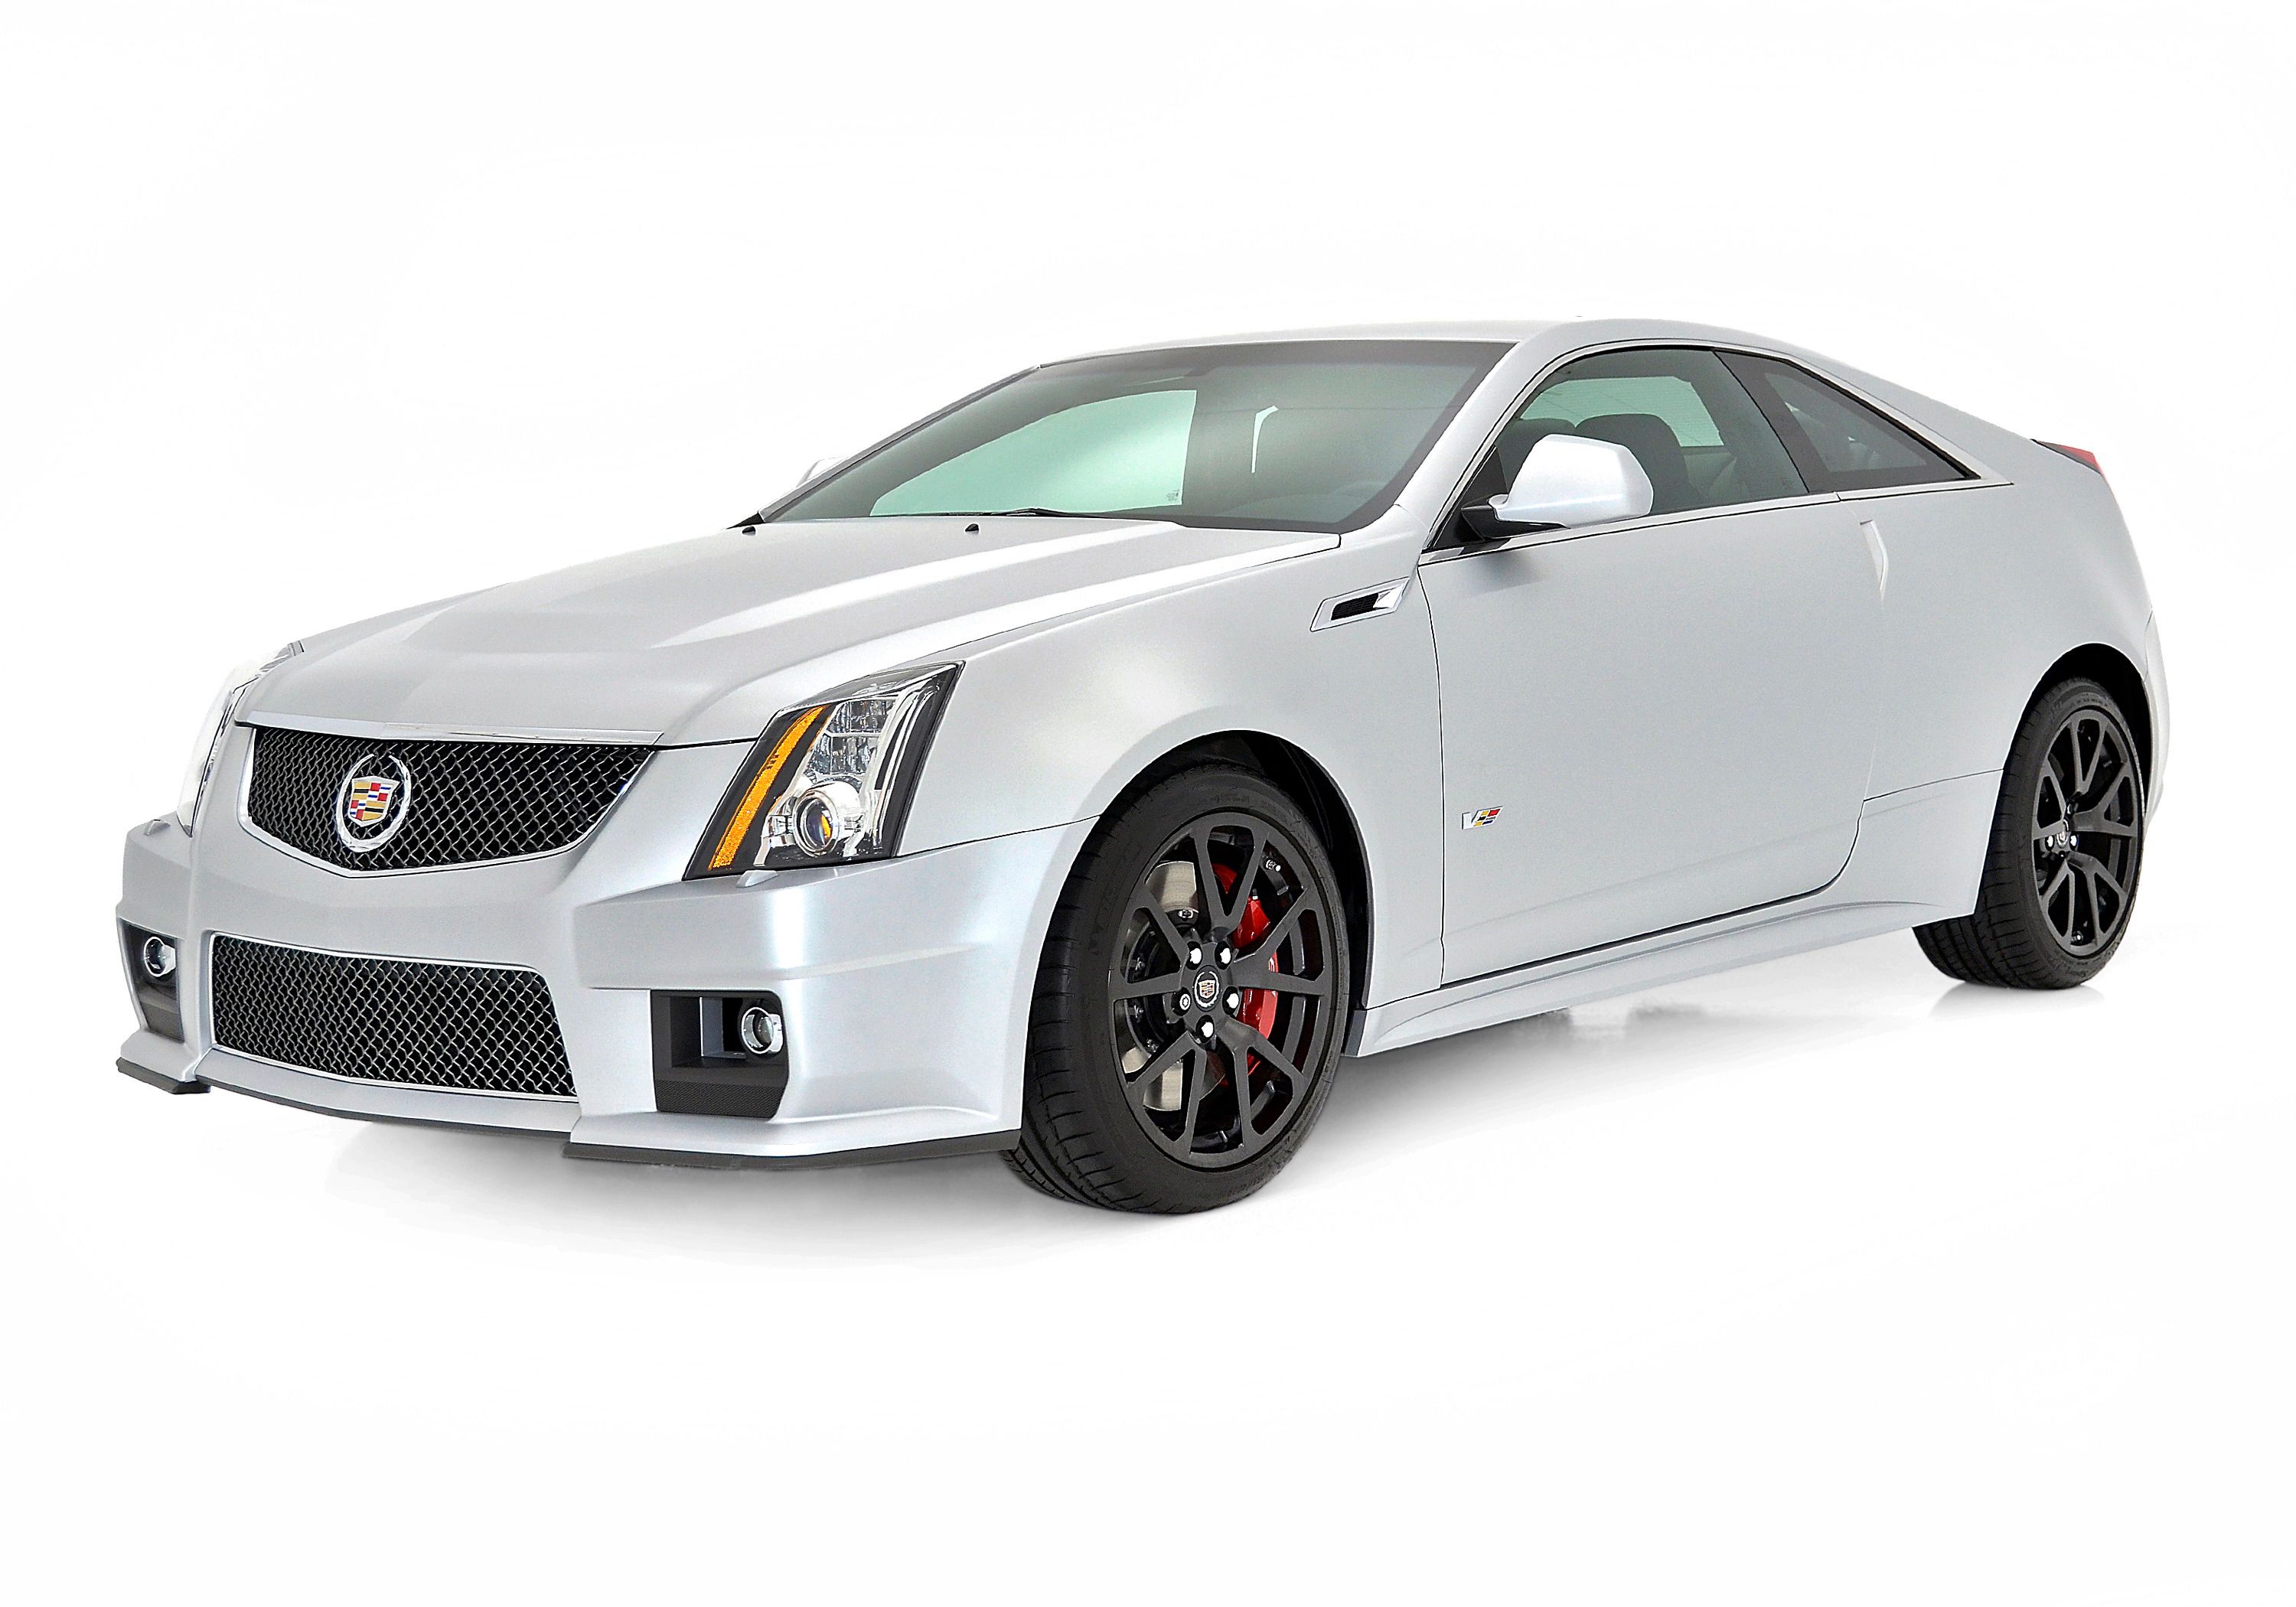 2013 Cadillac CTS-V Silver Frost and Stealth Blue Limited Edition 